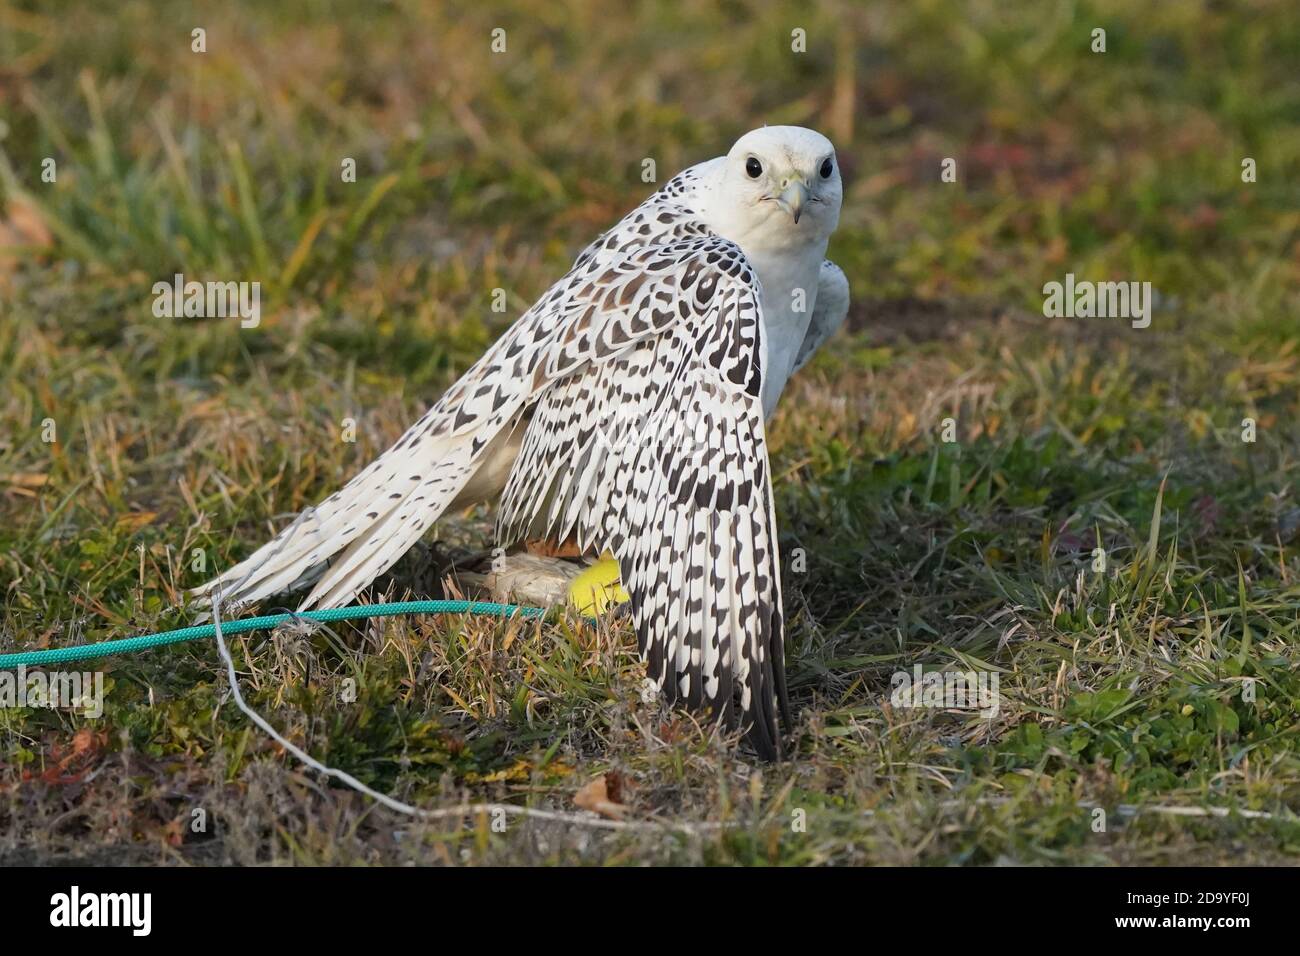 Gyrfalcon being trained for falconry Stock Photo